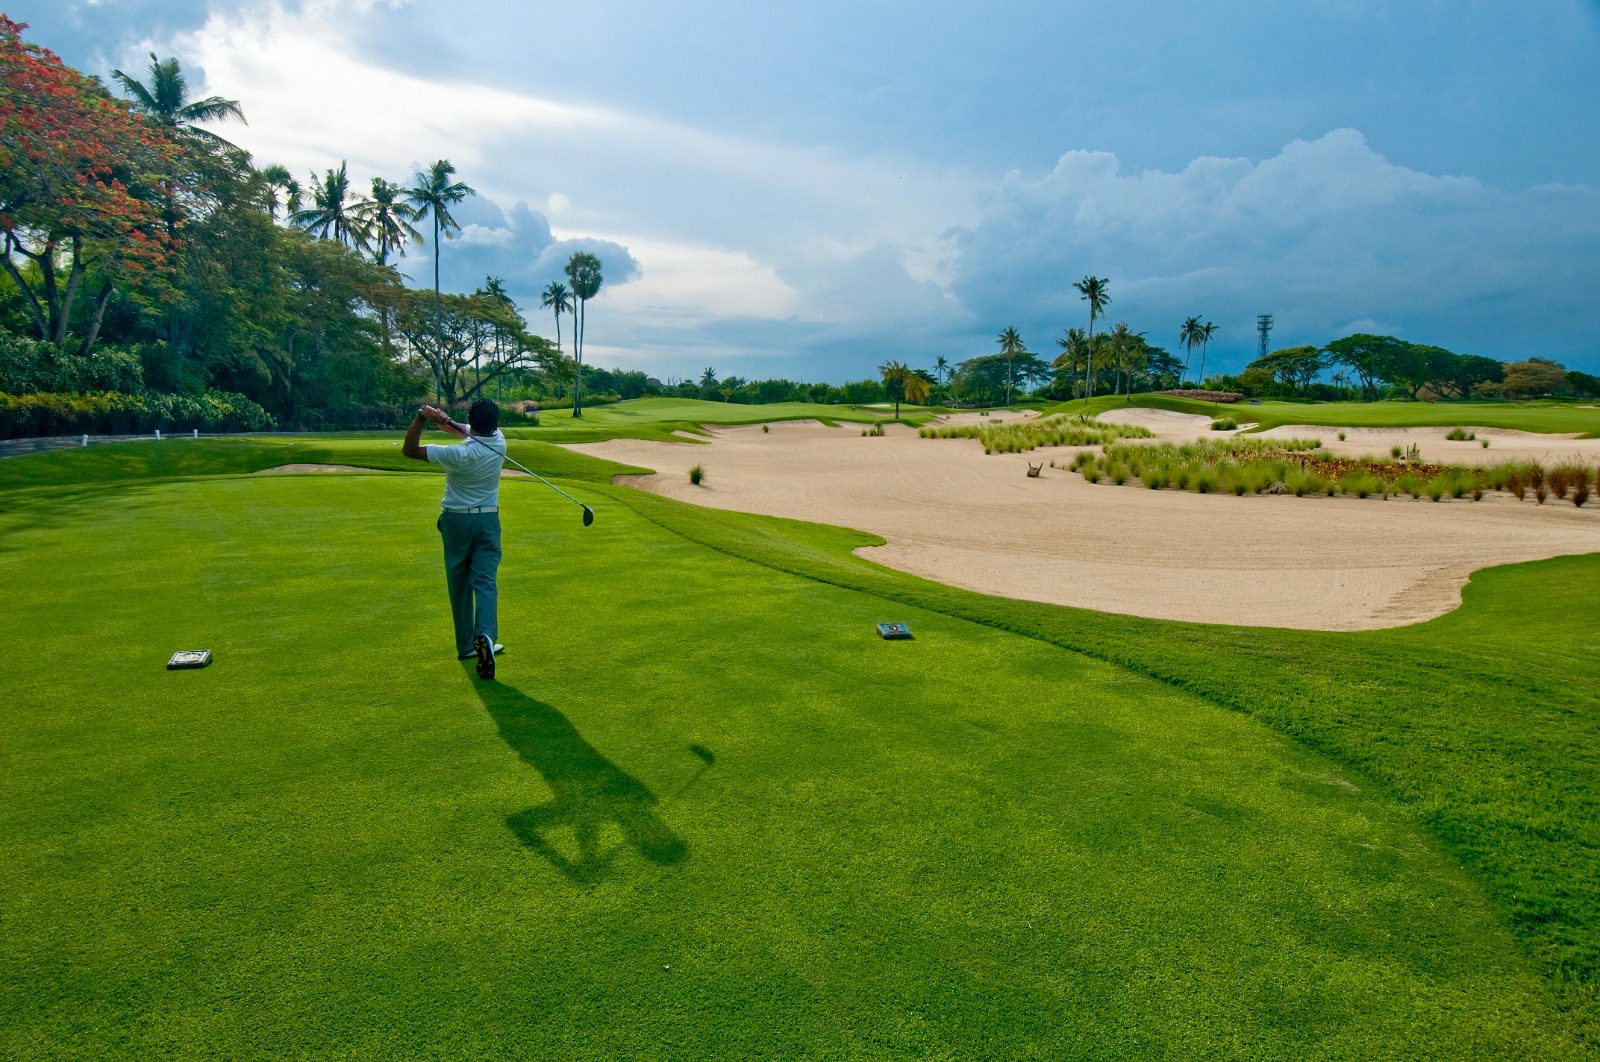 The Annual Marriott International  Bali Charity Golf Day is Back To Support  The Environment  Sustainability  And The Community